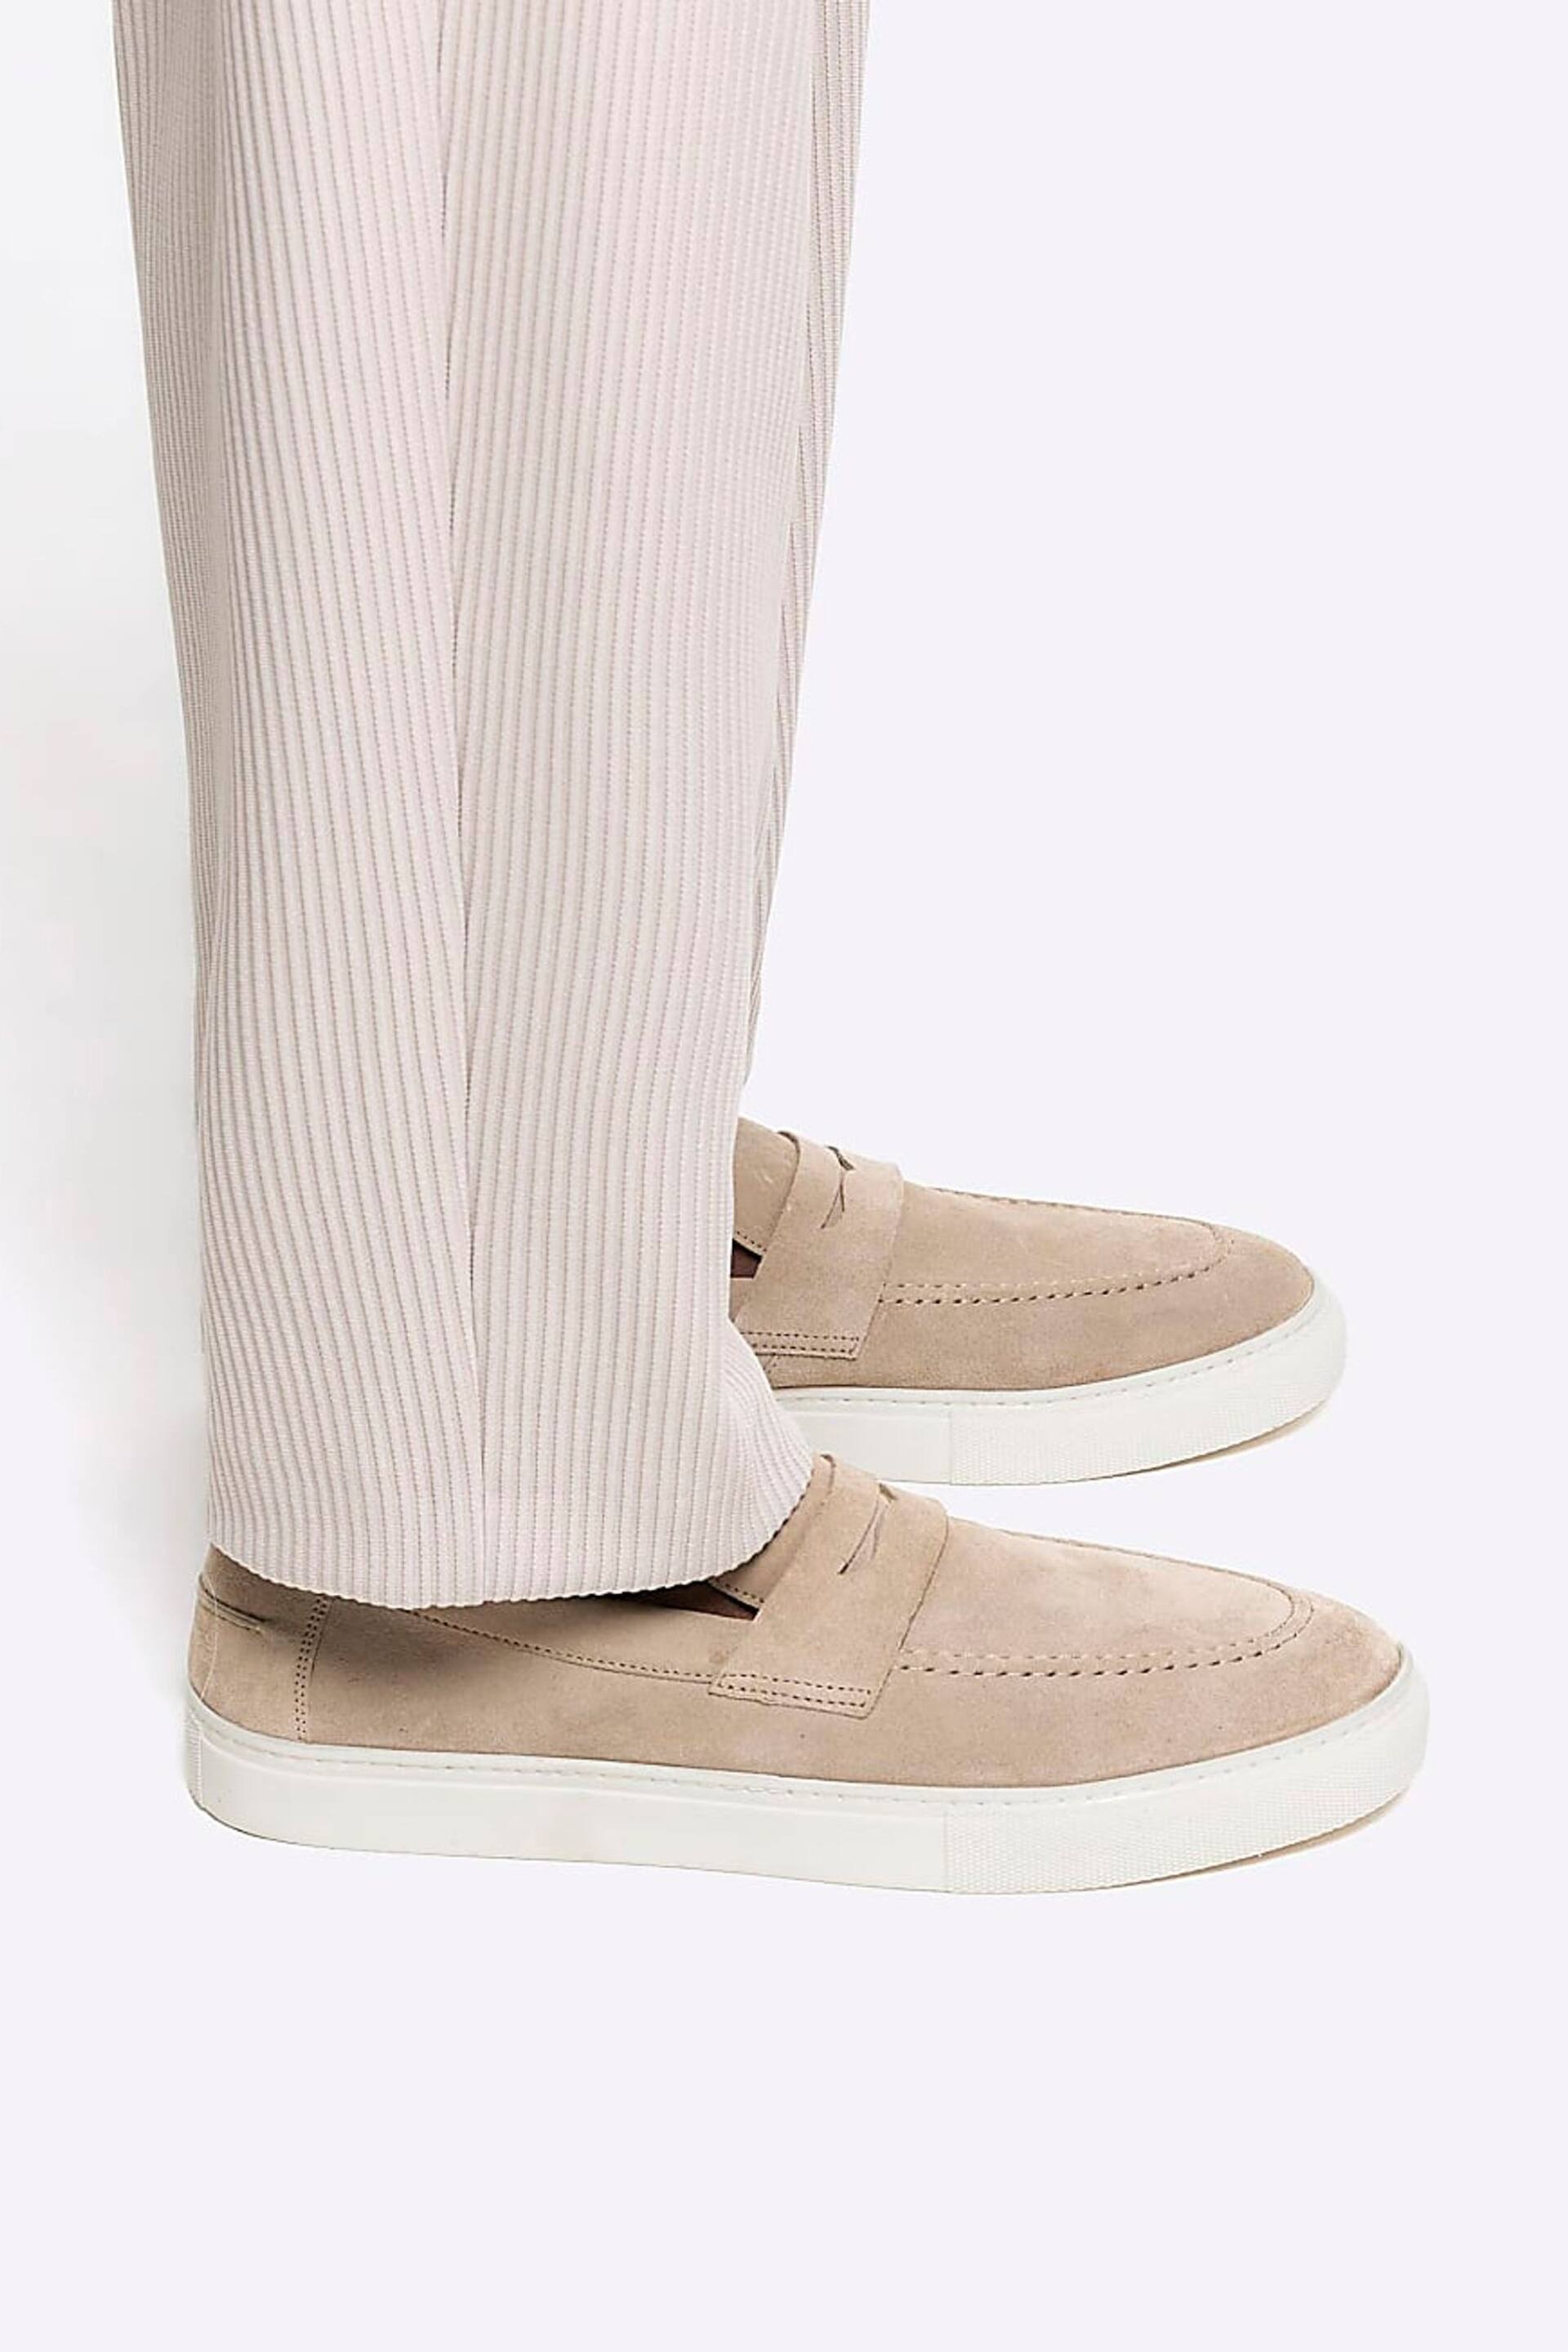 River Island Beige Suede Loafers - Image 6 of 6